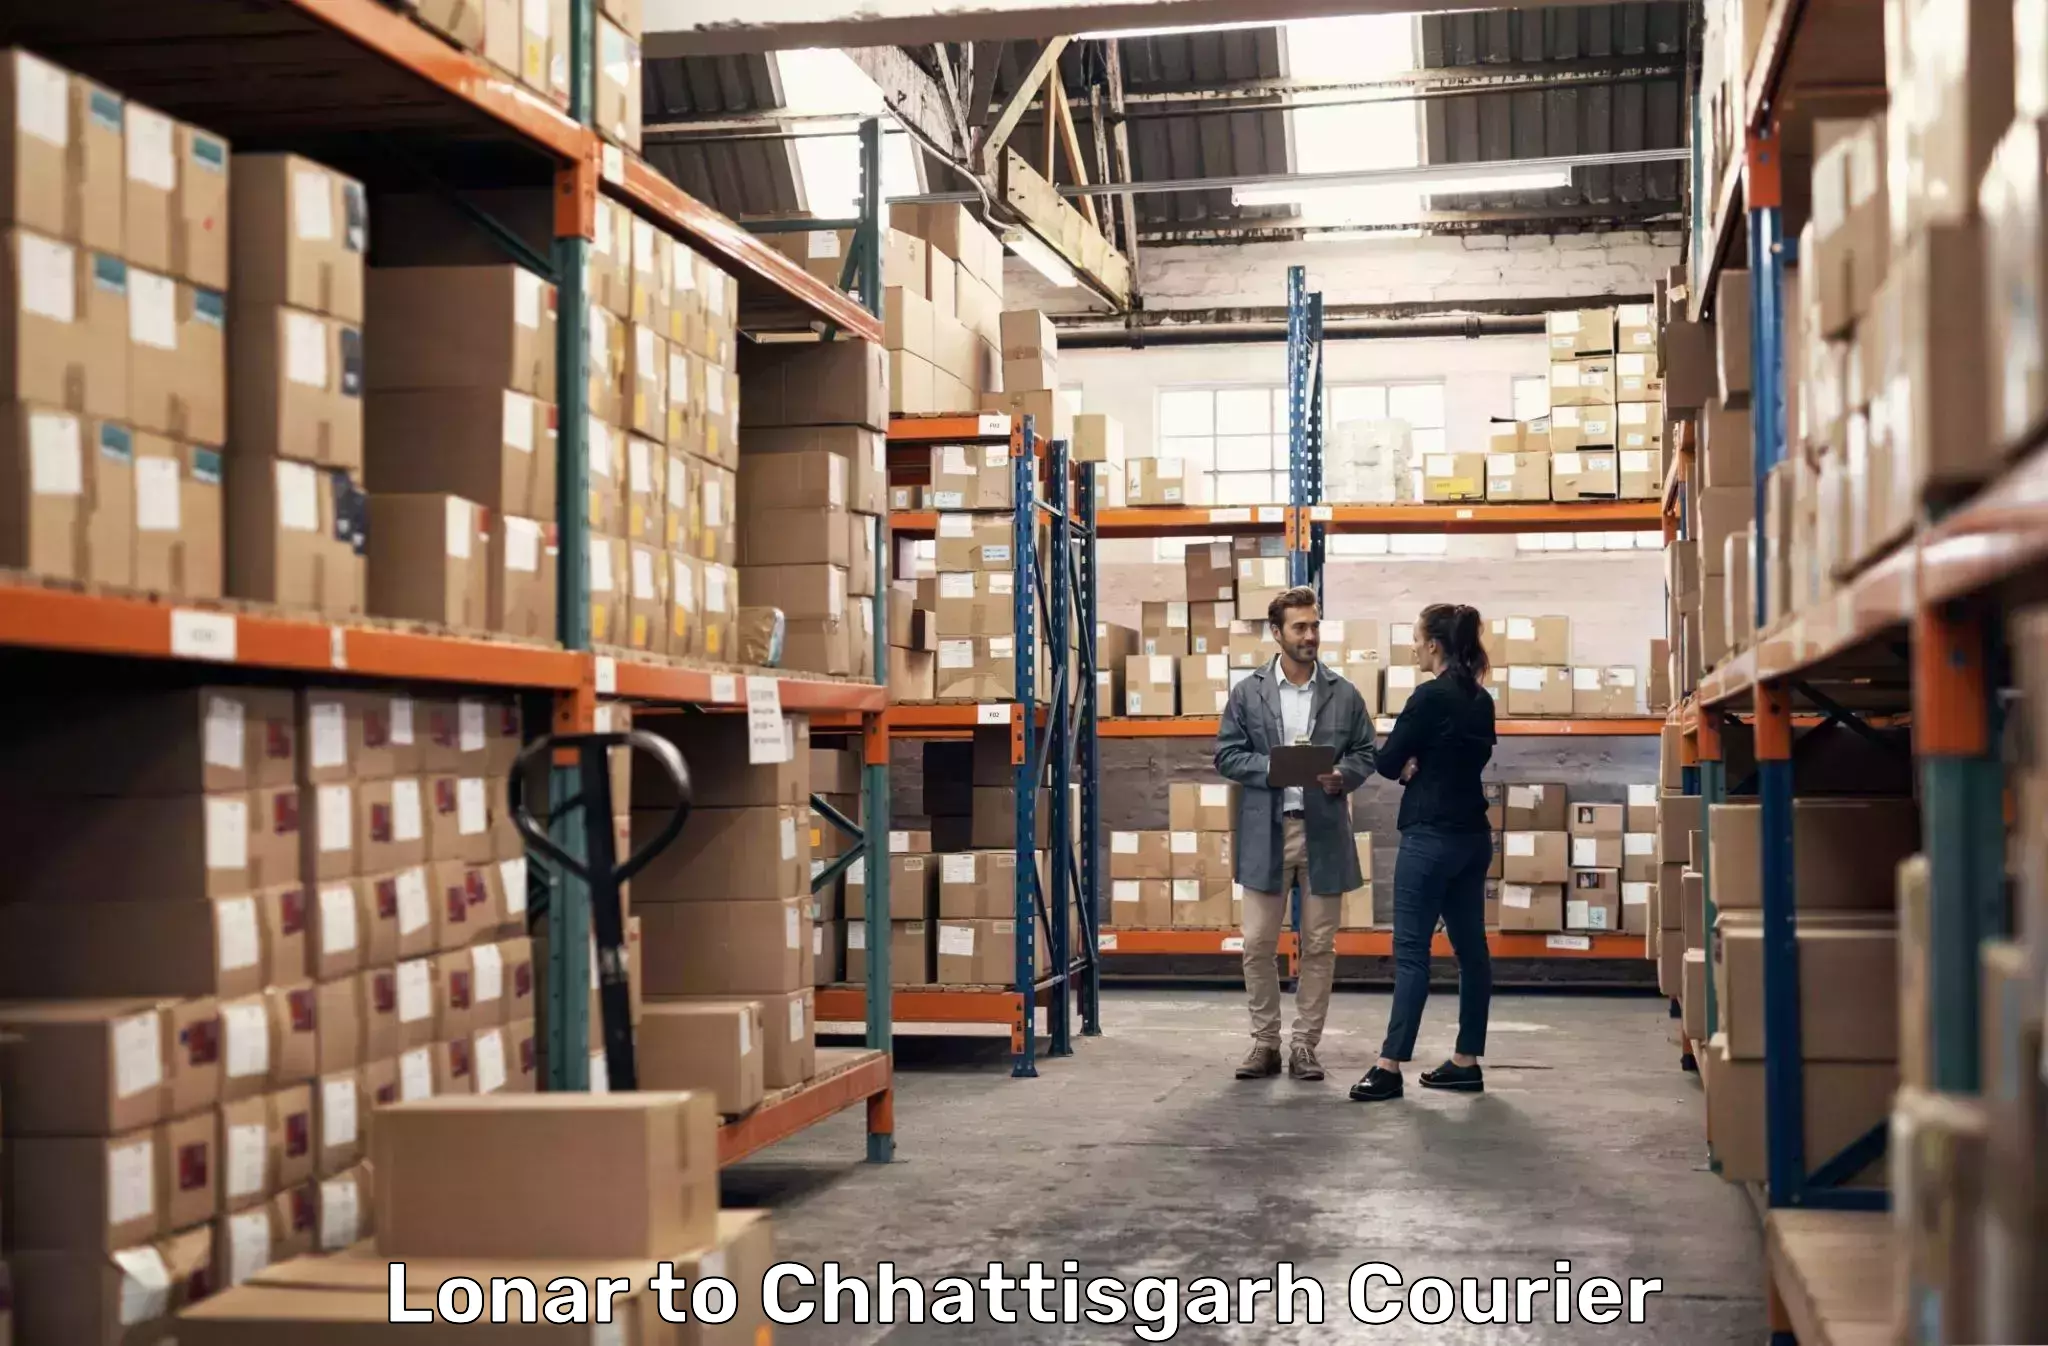 Residential courier service Lonar to Raigarh